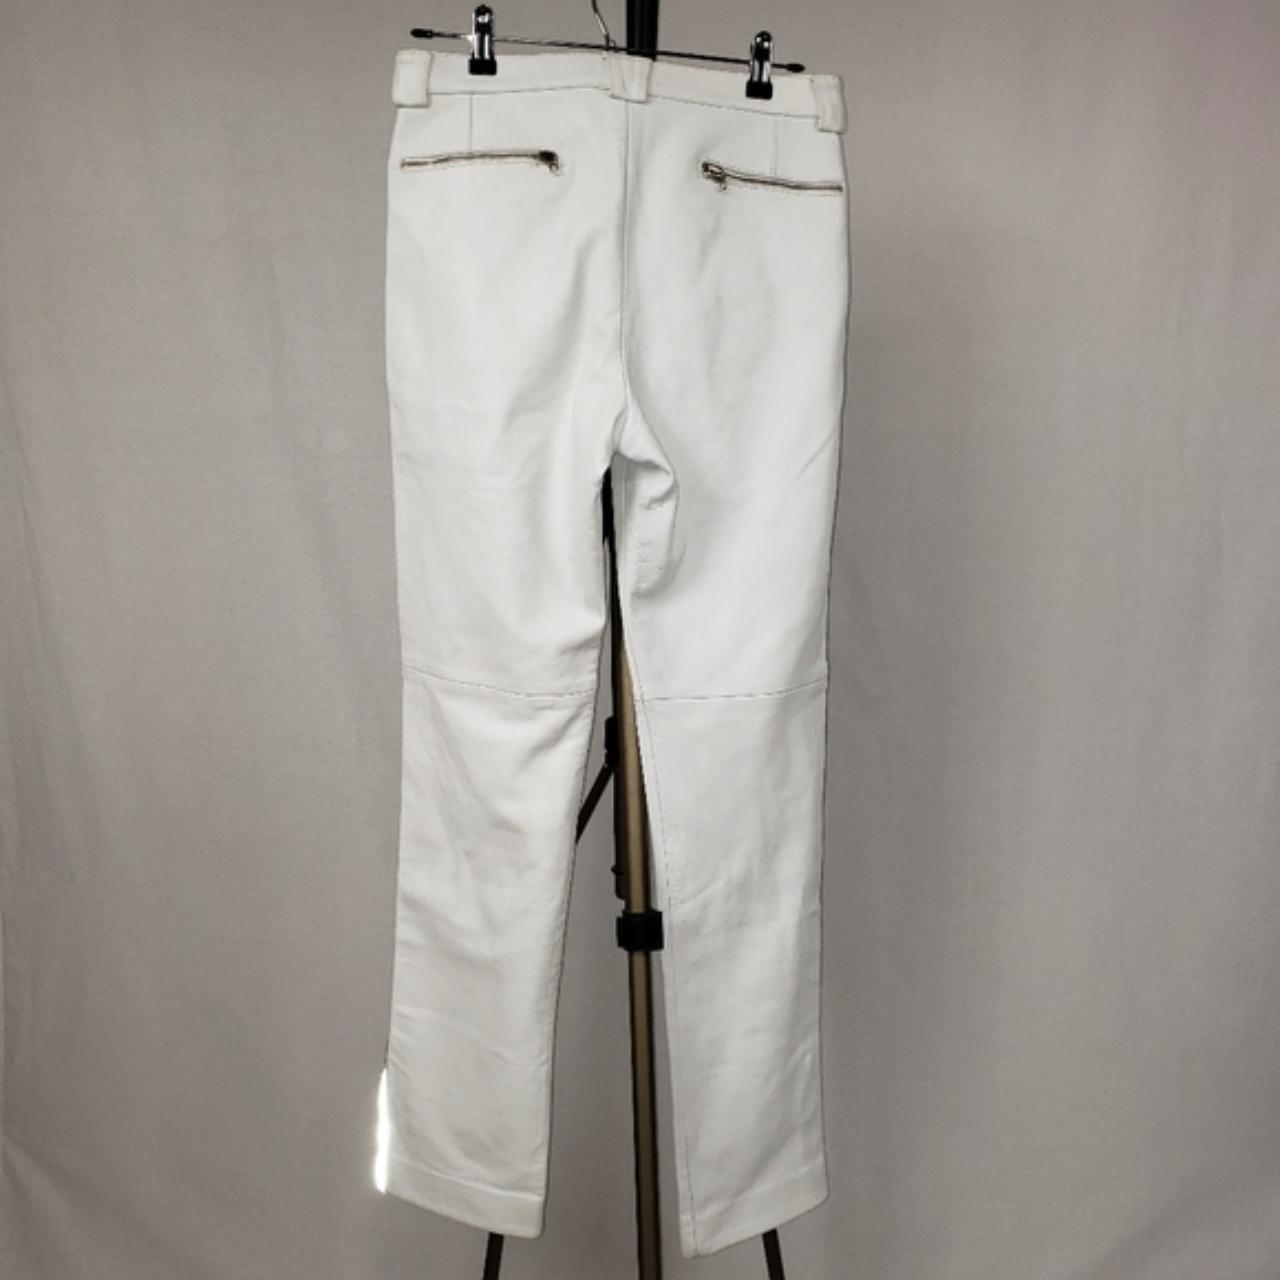 Extremely rare Donald J Pliner white leather pants... - Depop